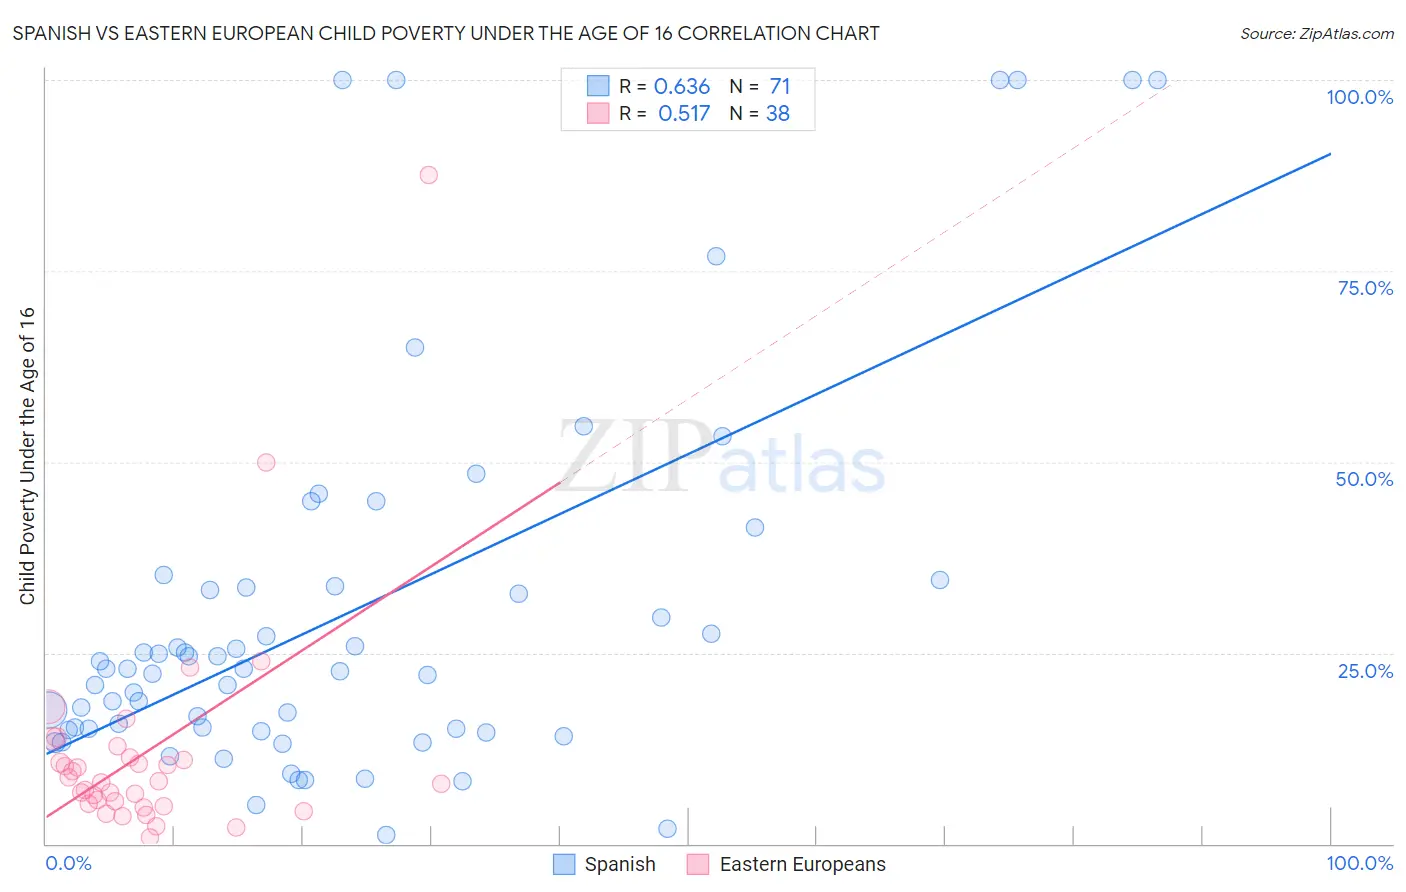 Spanish vs Eastern European Child Poverty Under the Age of 16